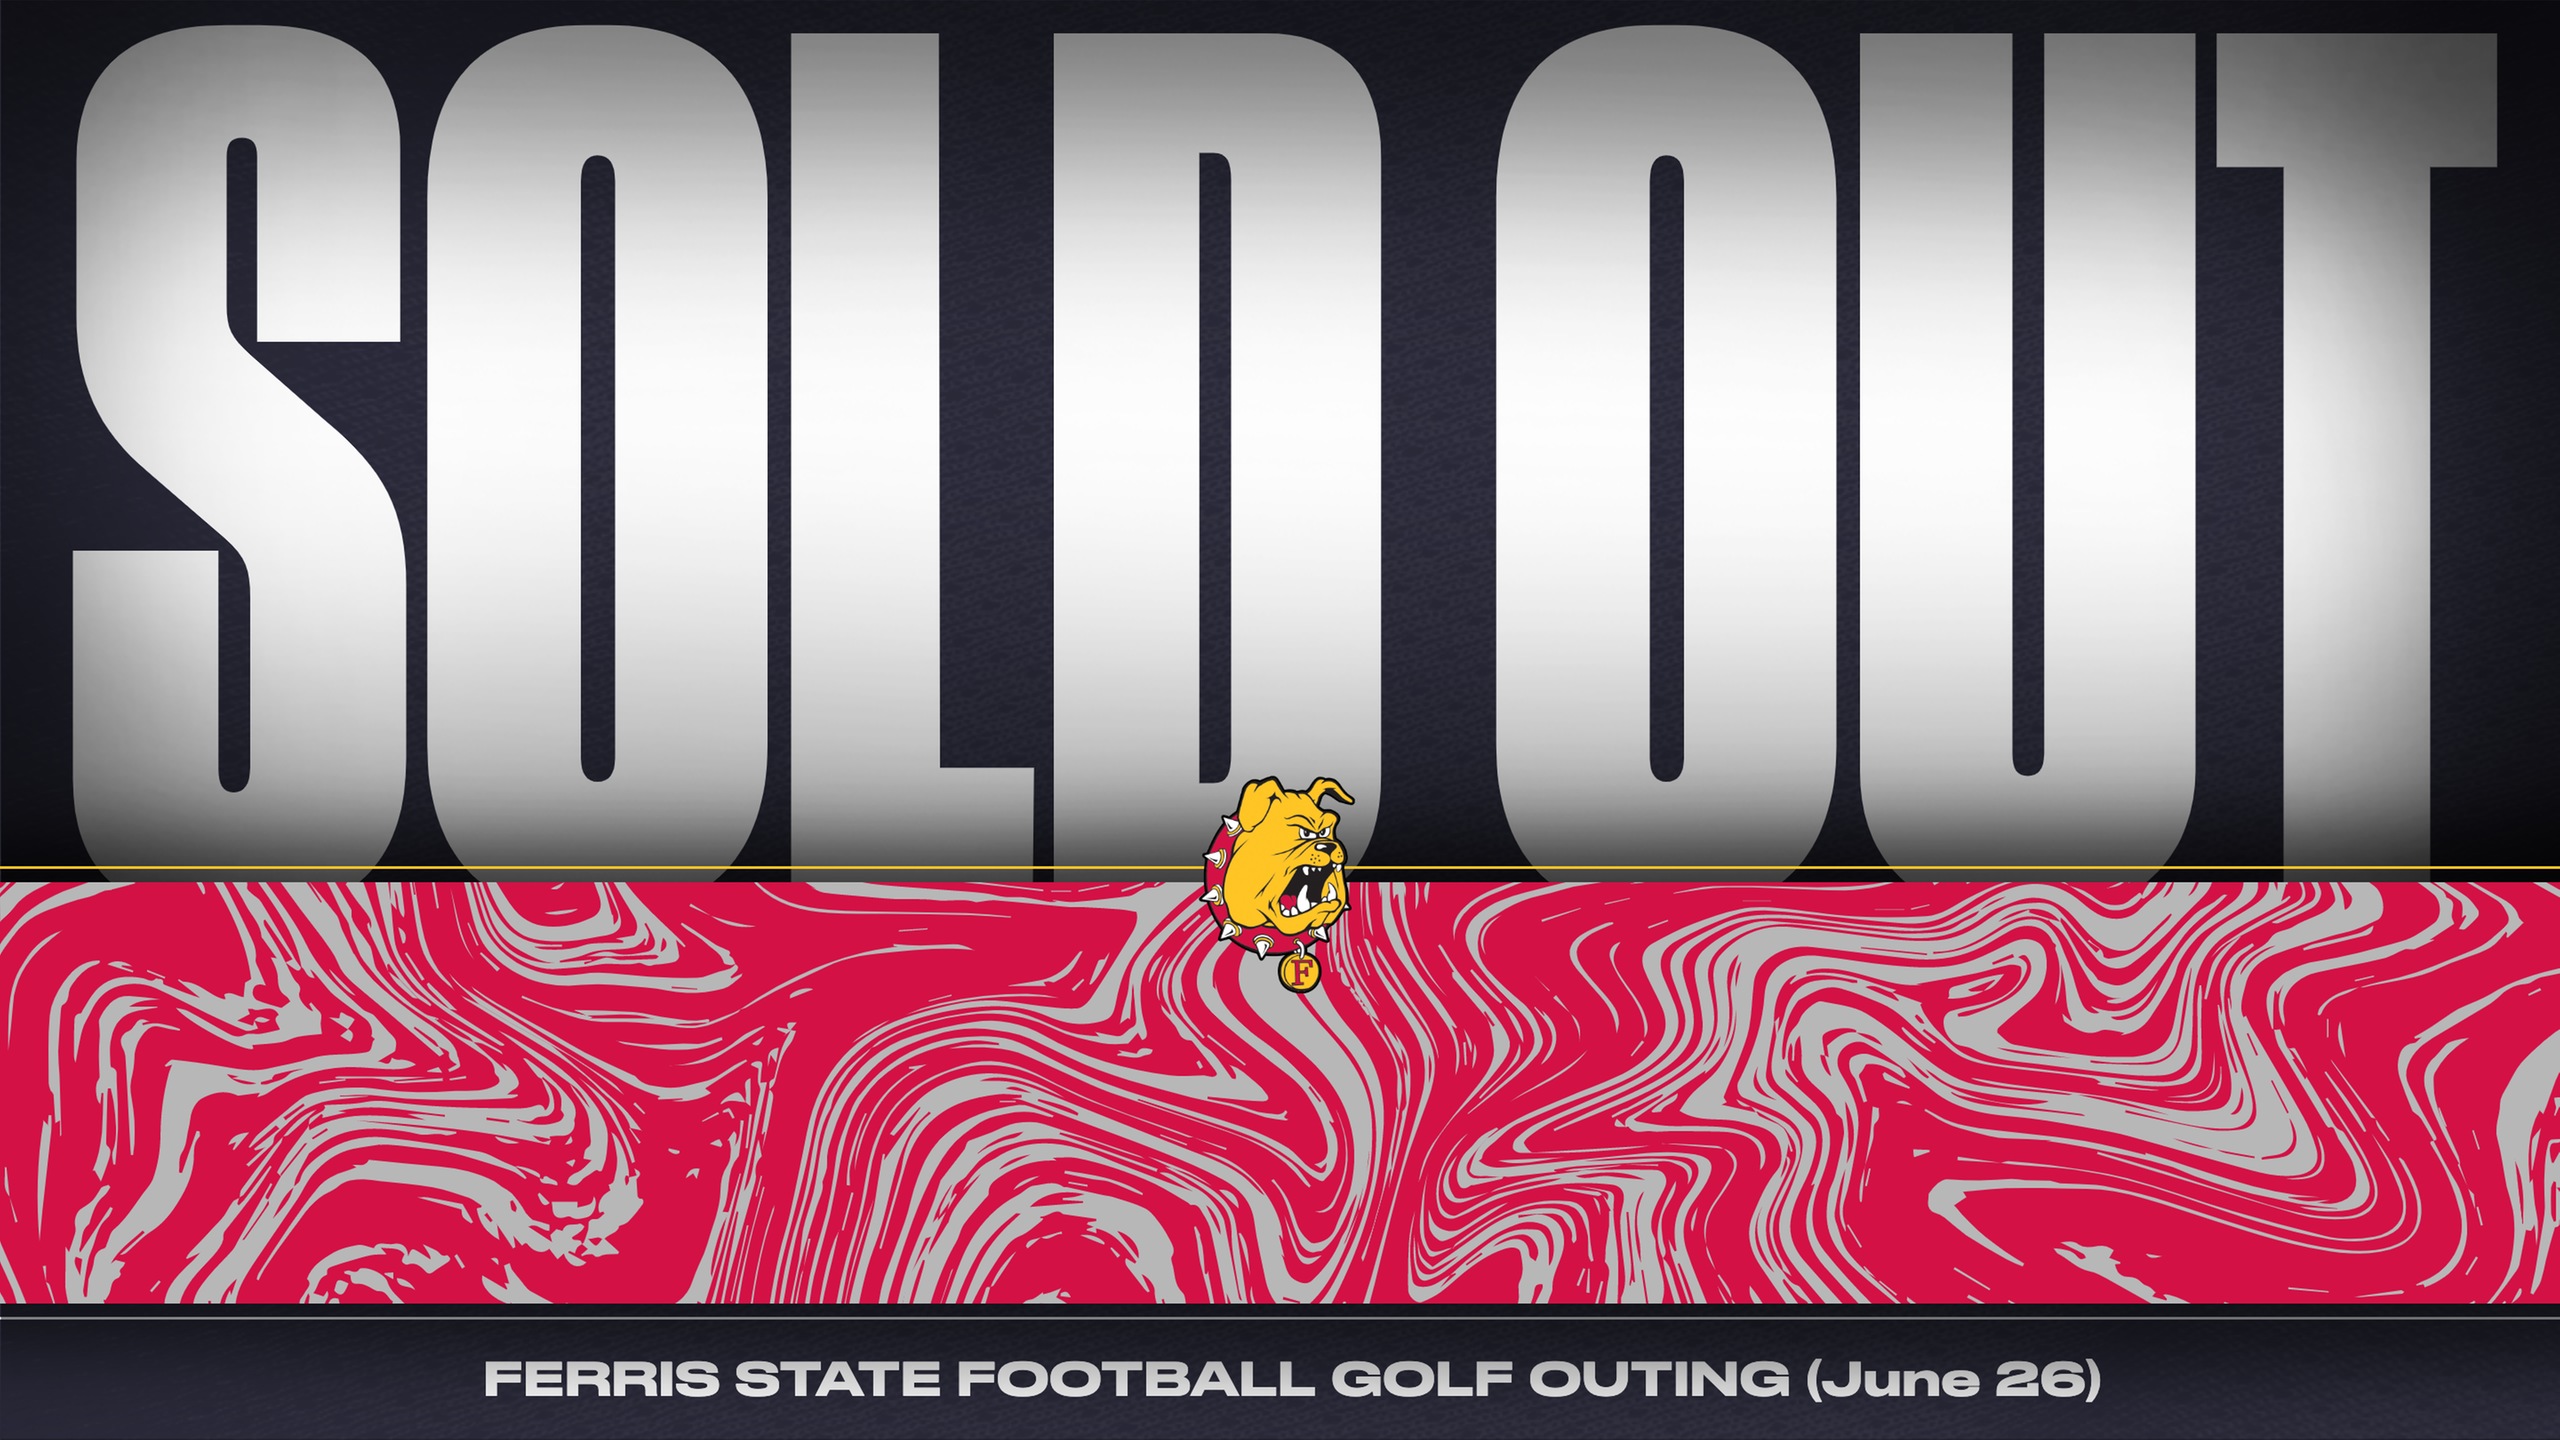 Ferris State Football Golf Outing Officially SOLD OUT!